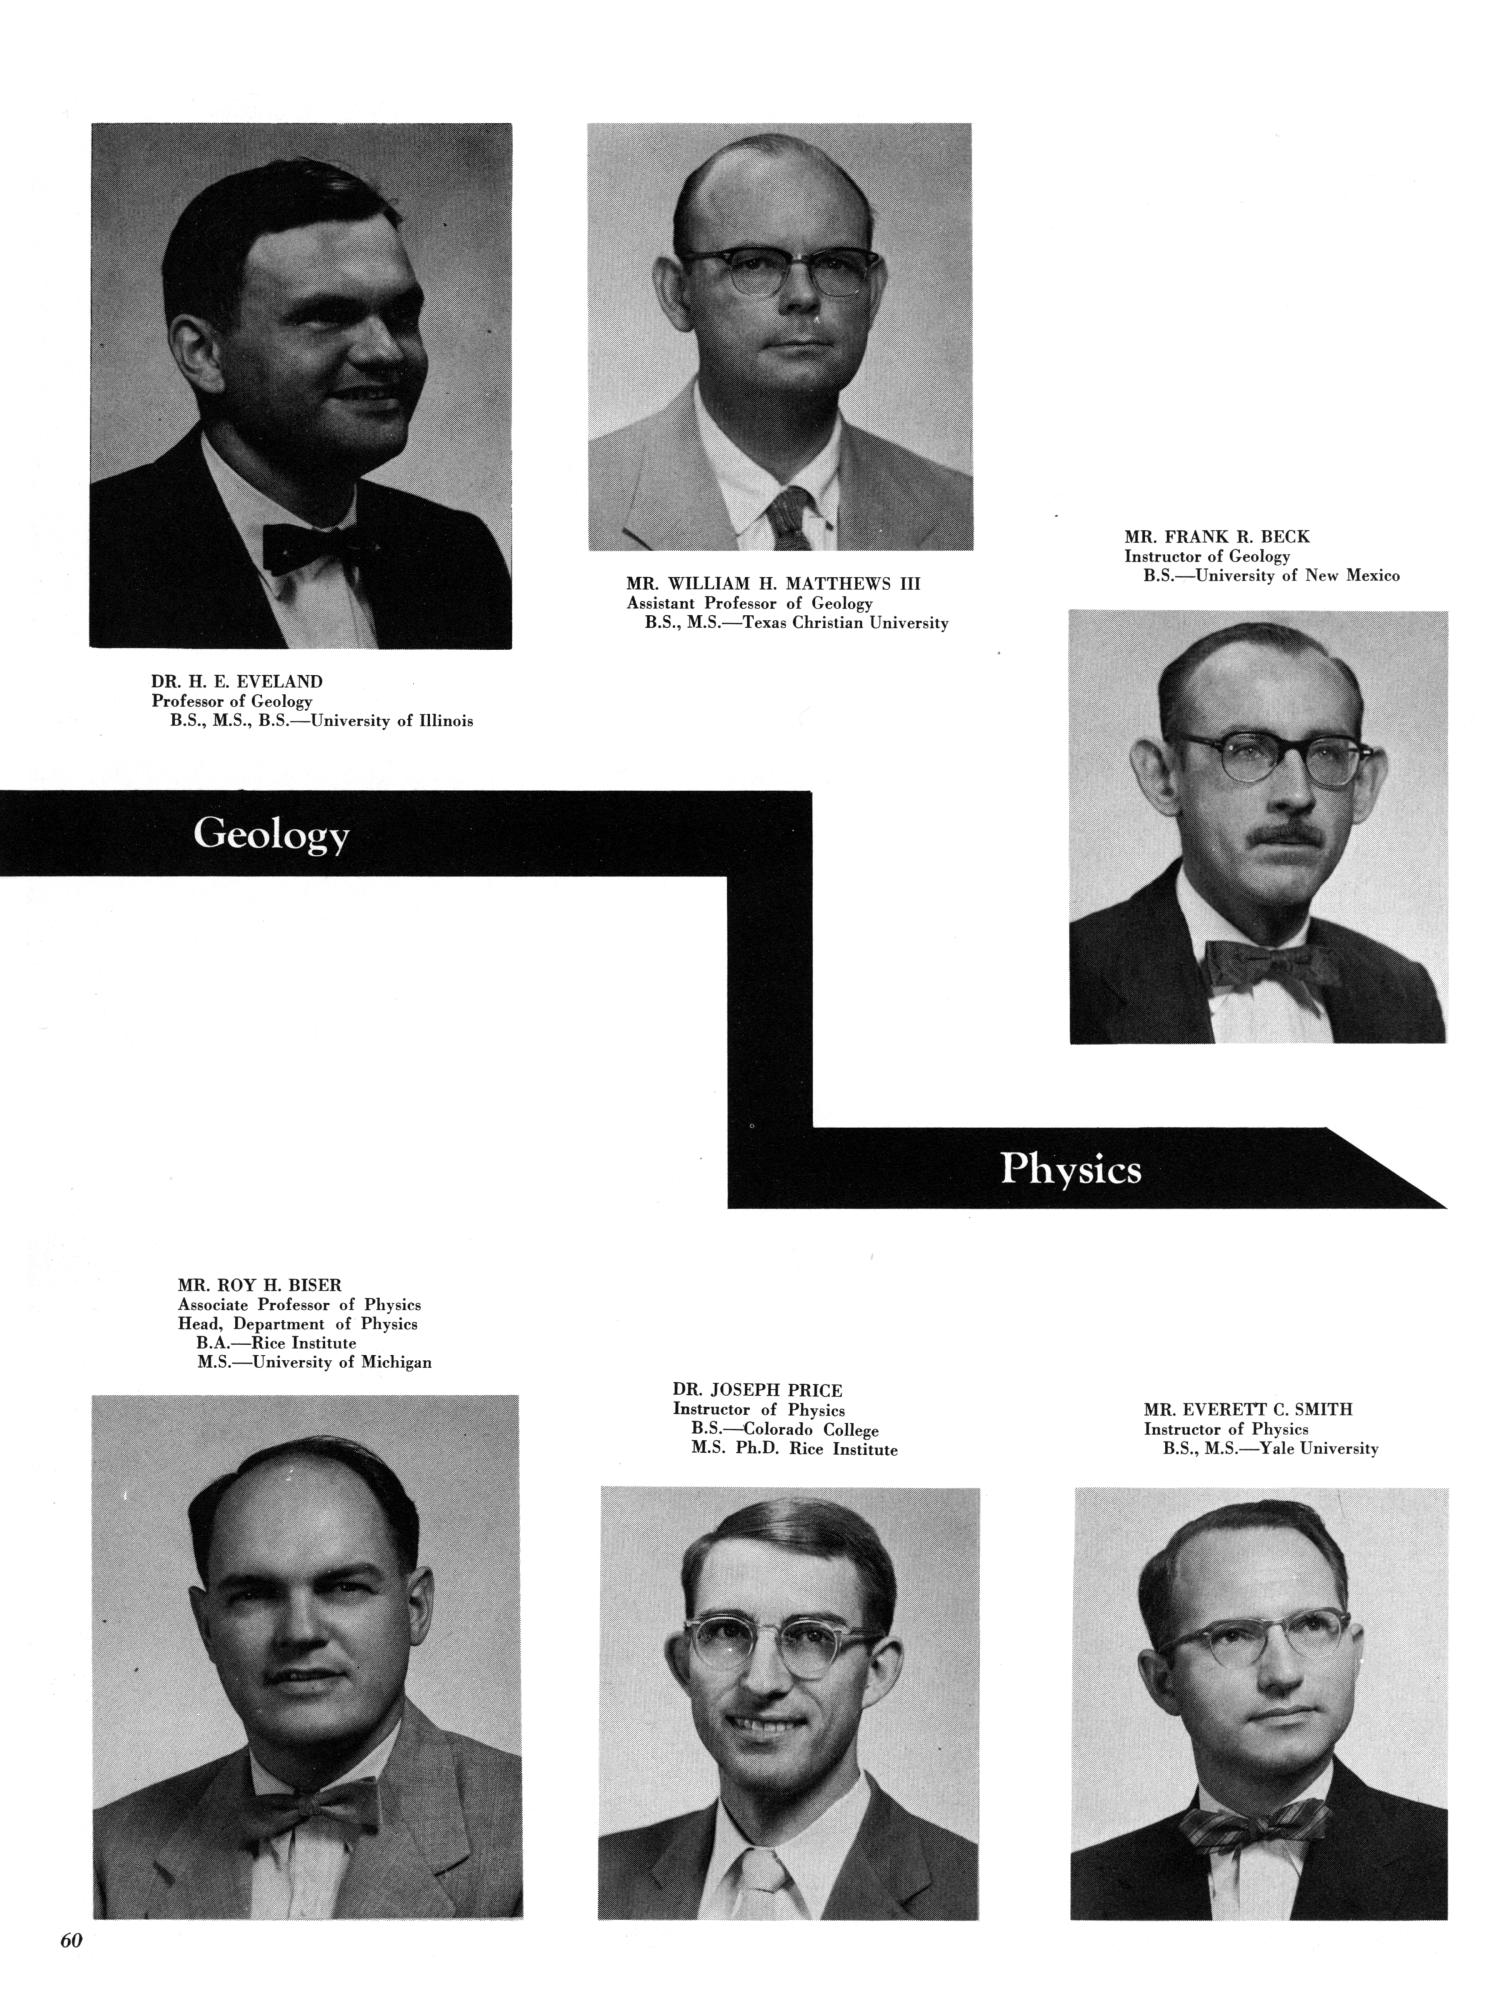 The Cardinal, Yearbook of Lamar State College of Technology, 1957
                                                
                                                    60
                                                